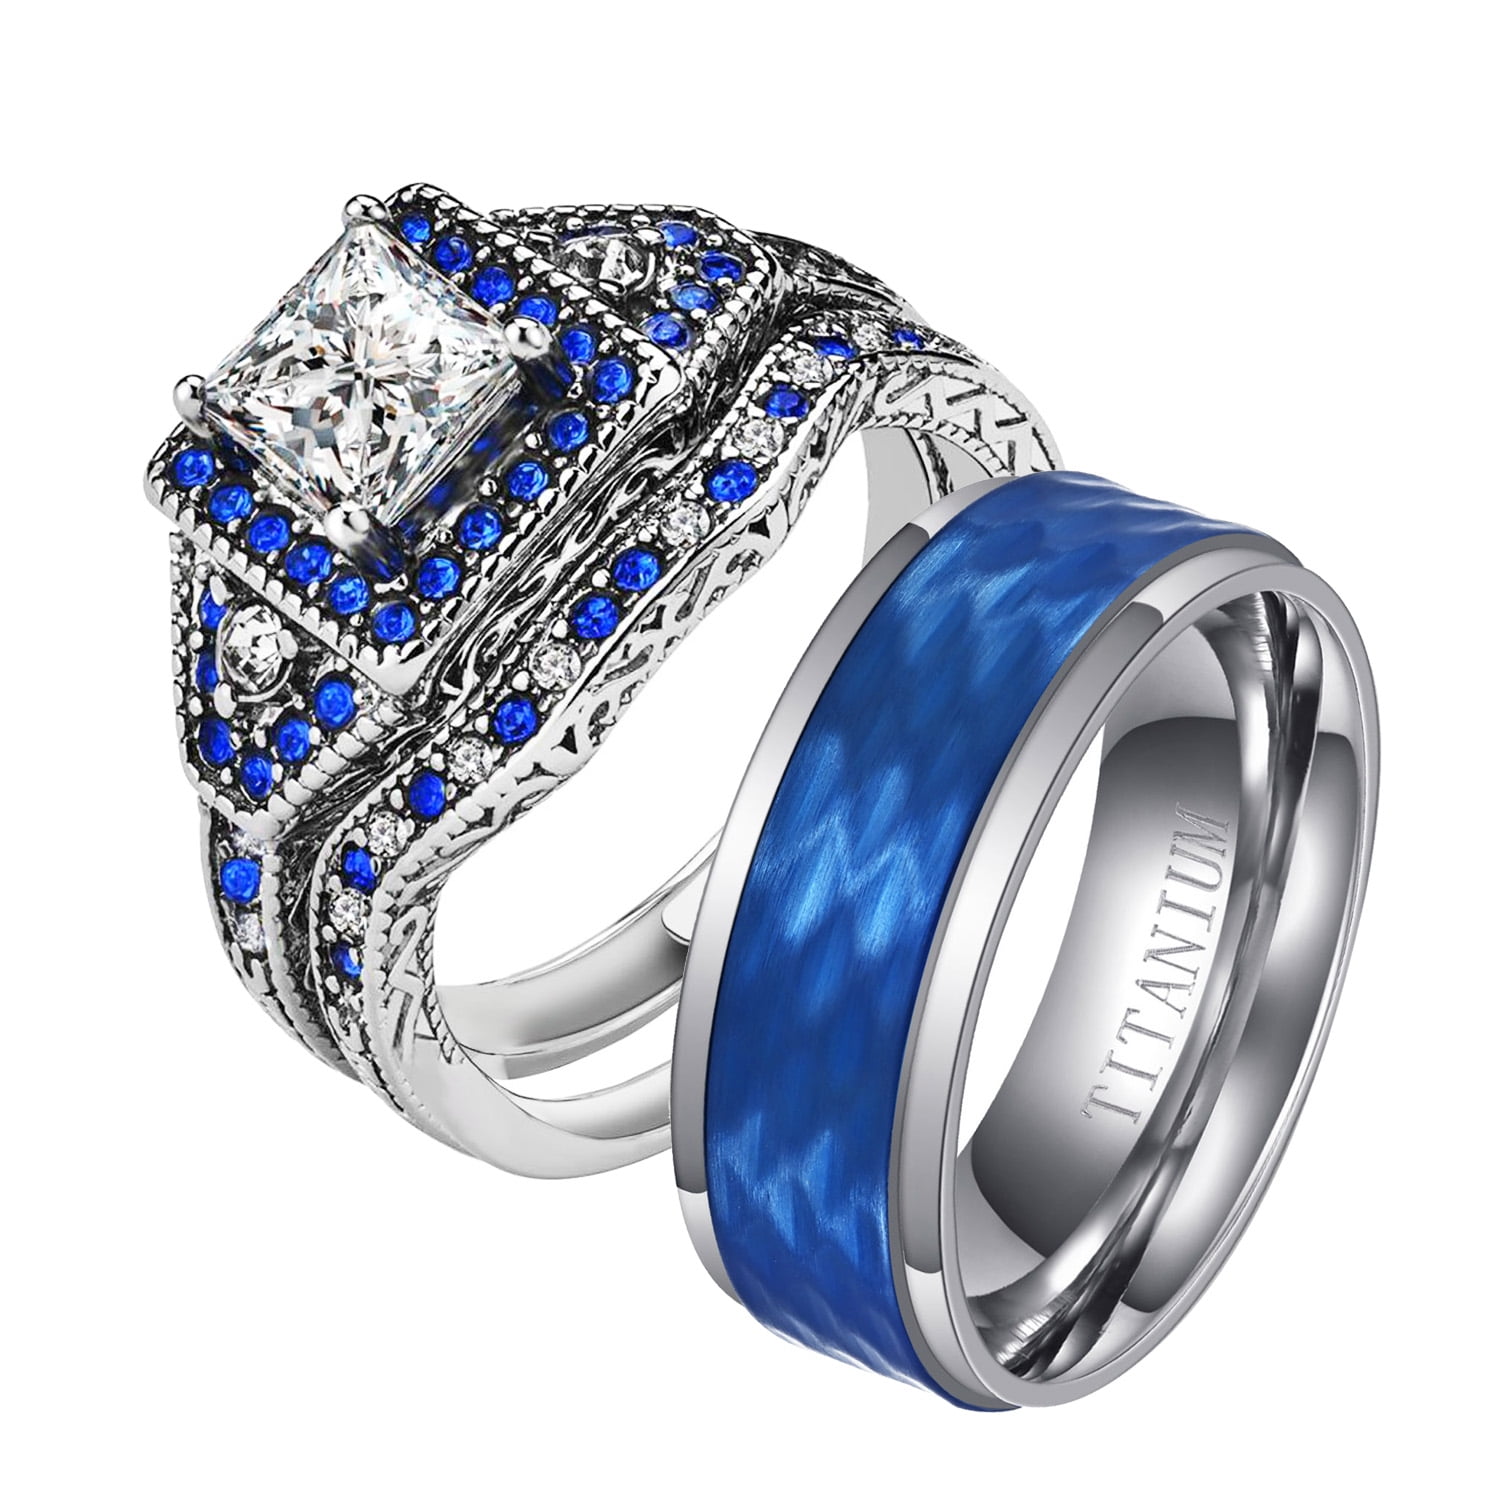 Blue Wedding Ring Sets His And Hers Factory Sale | bellvalefarms.com